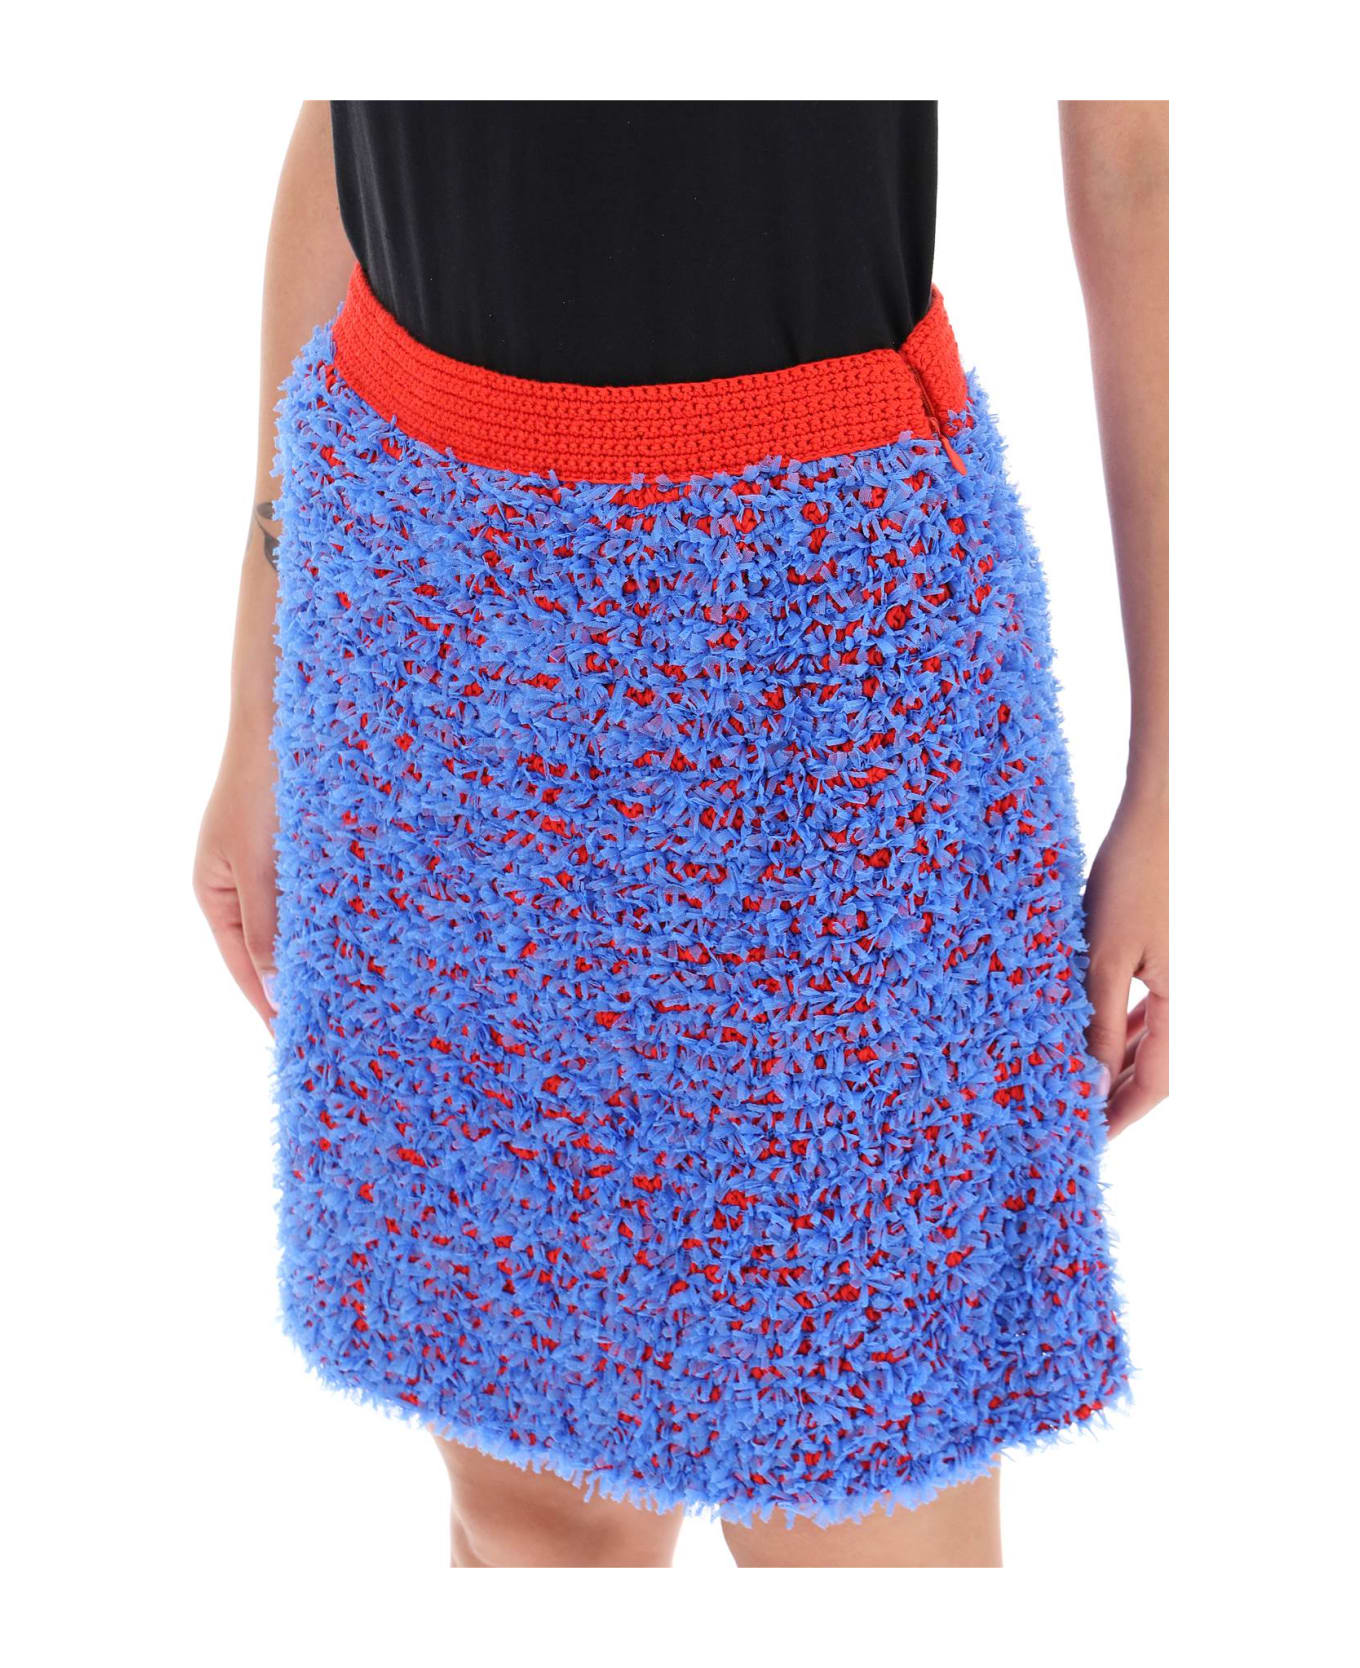 Tory Burch Tweed Mini Skirt - BLUE COSMO RED CHILI (Red)